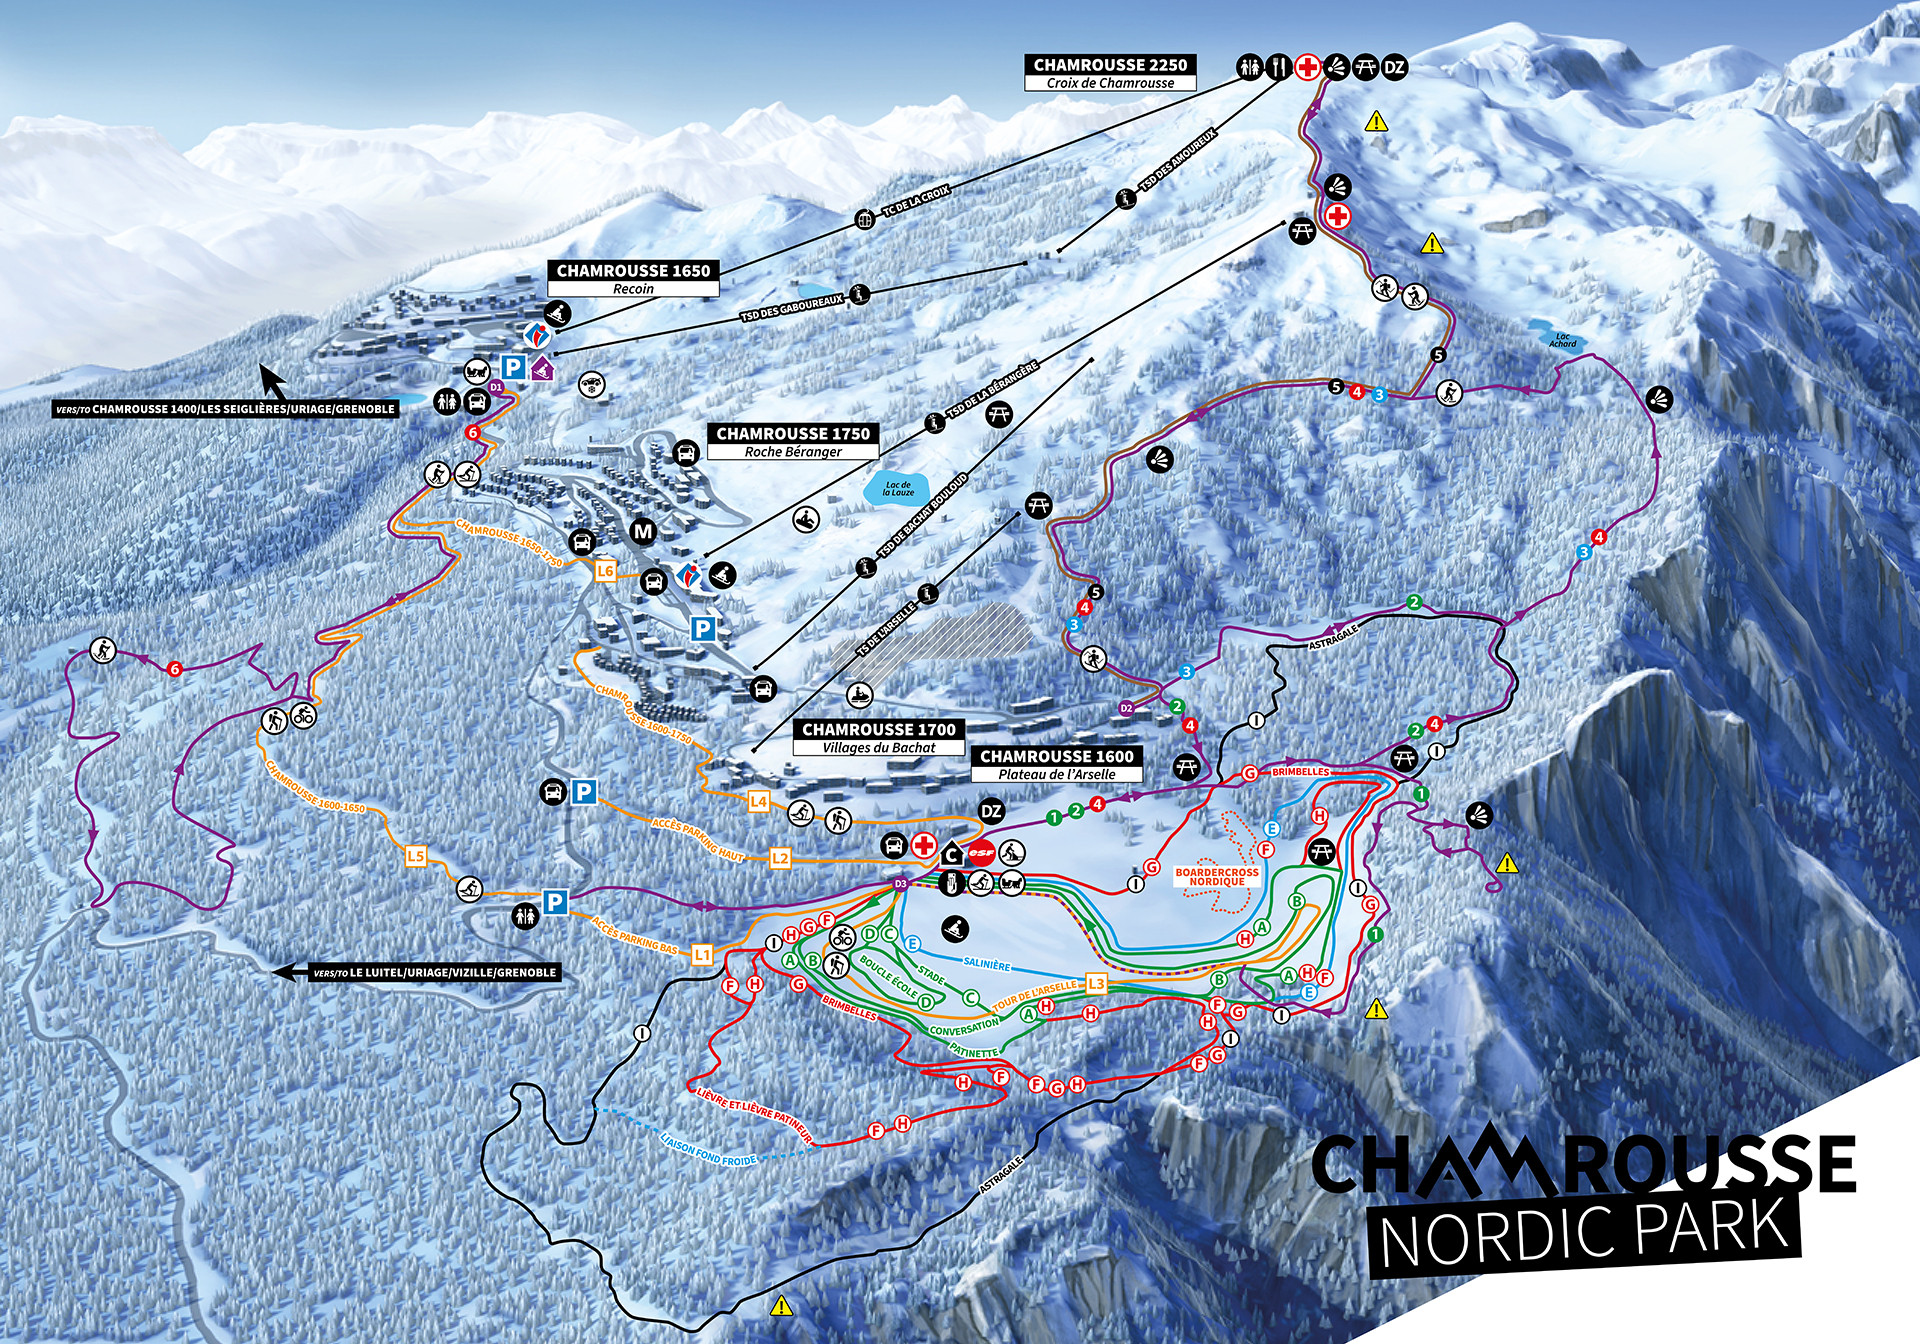 Chamrousse Nordic Park nordic ski map cross-country skiing classic and skating slopes winter 2023 2024 mountain resort grenoble isere french alps france